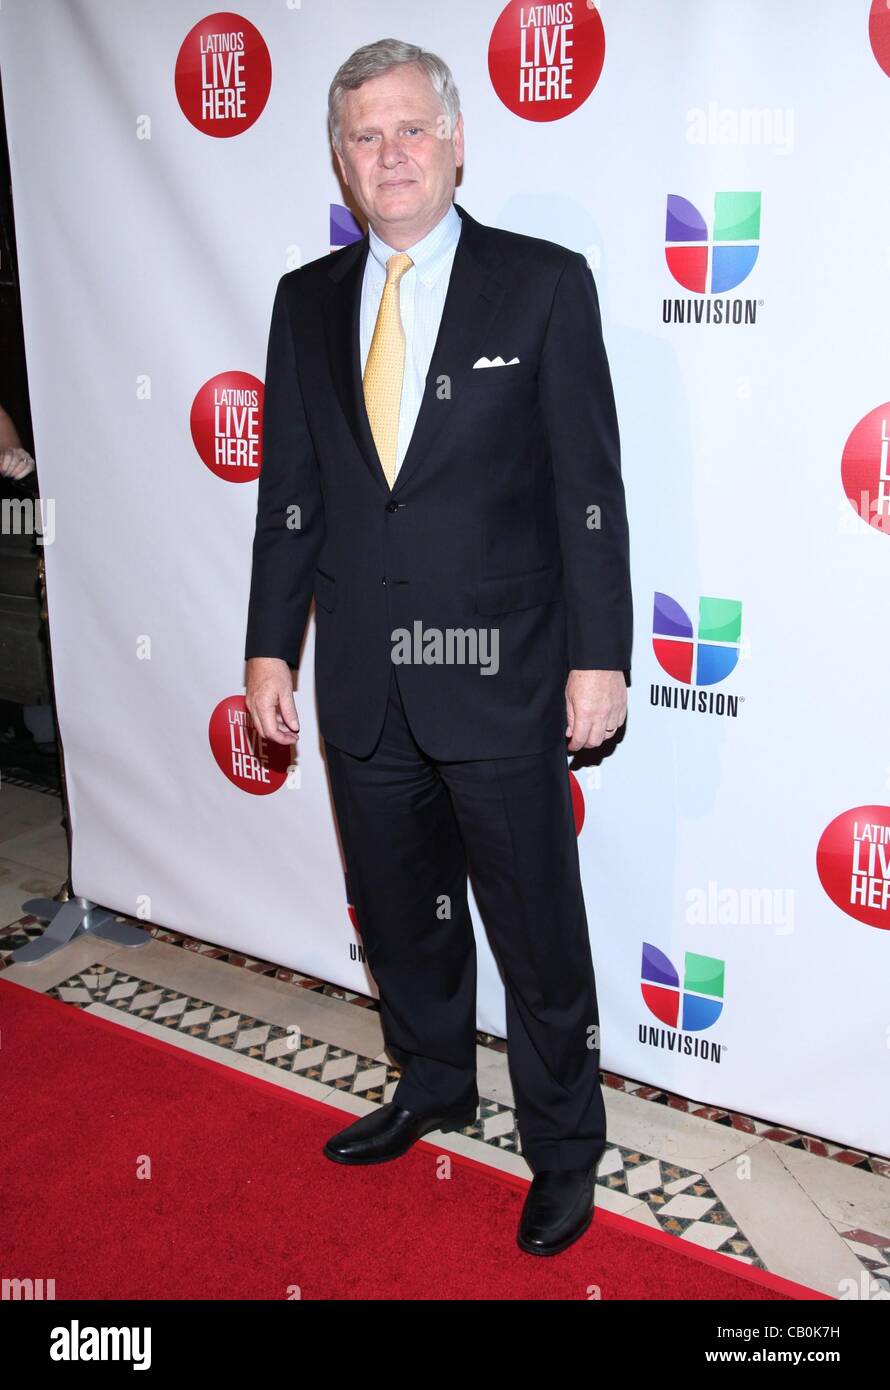 Randy Falco at arrivals for Univision Network Upfronts Reception, Cipriani Restaurant 42nd Street, New York, NY May 15, 2012. Photo By: Andres Otero/Everett Collection Stock Photo